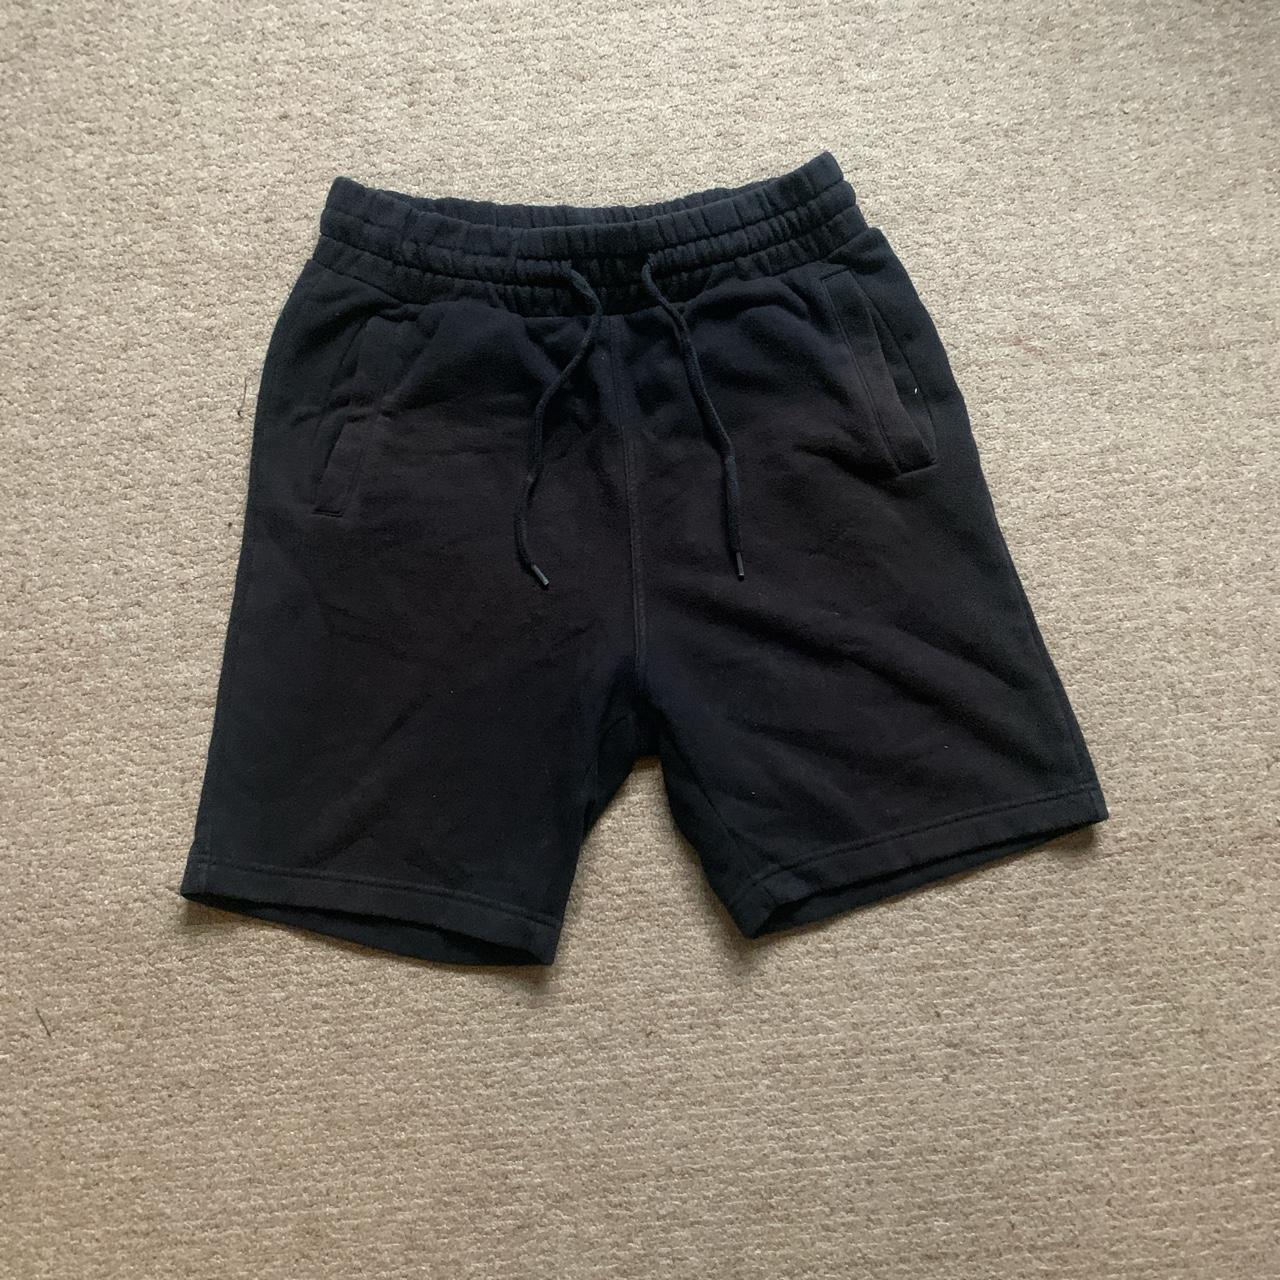 Size small relaxed fit h and m jogger shorts black,... - Depop